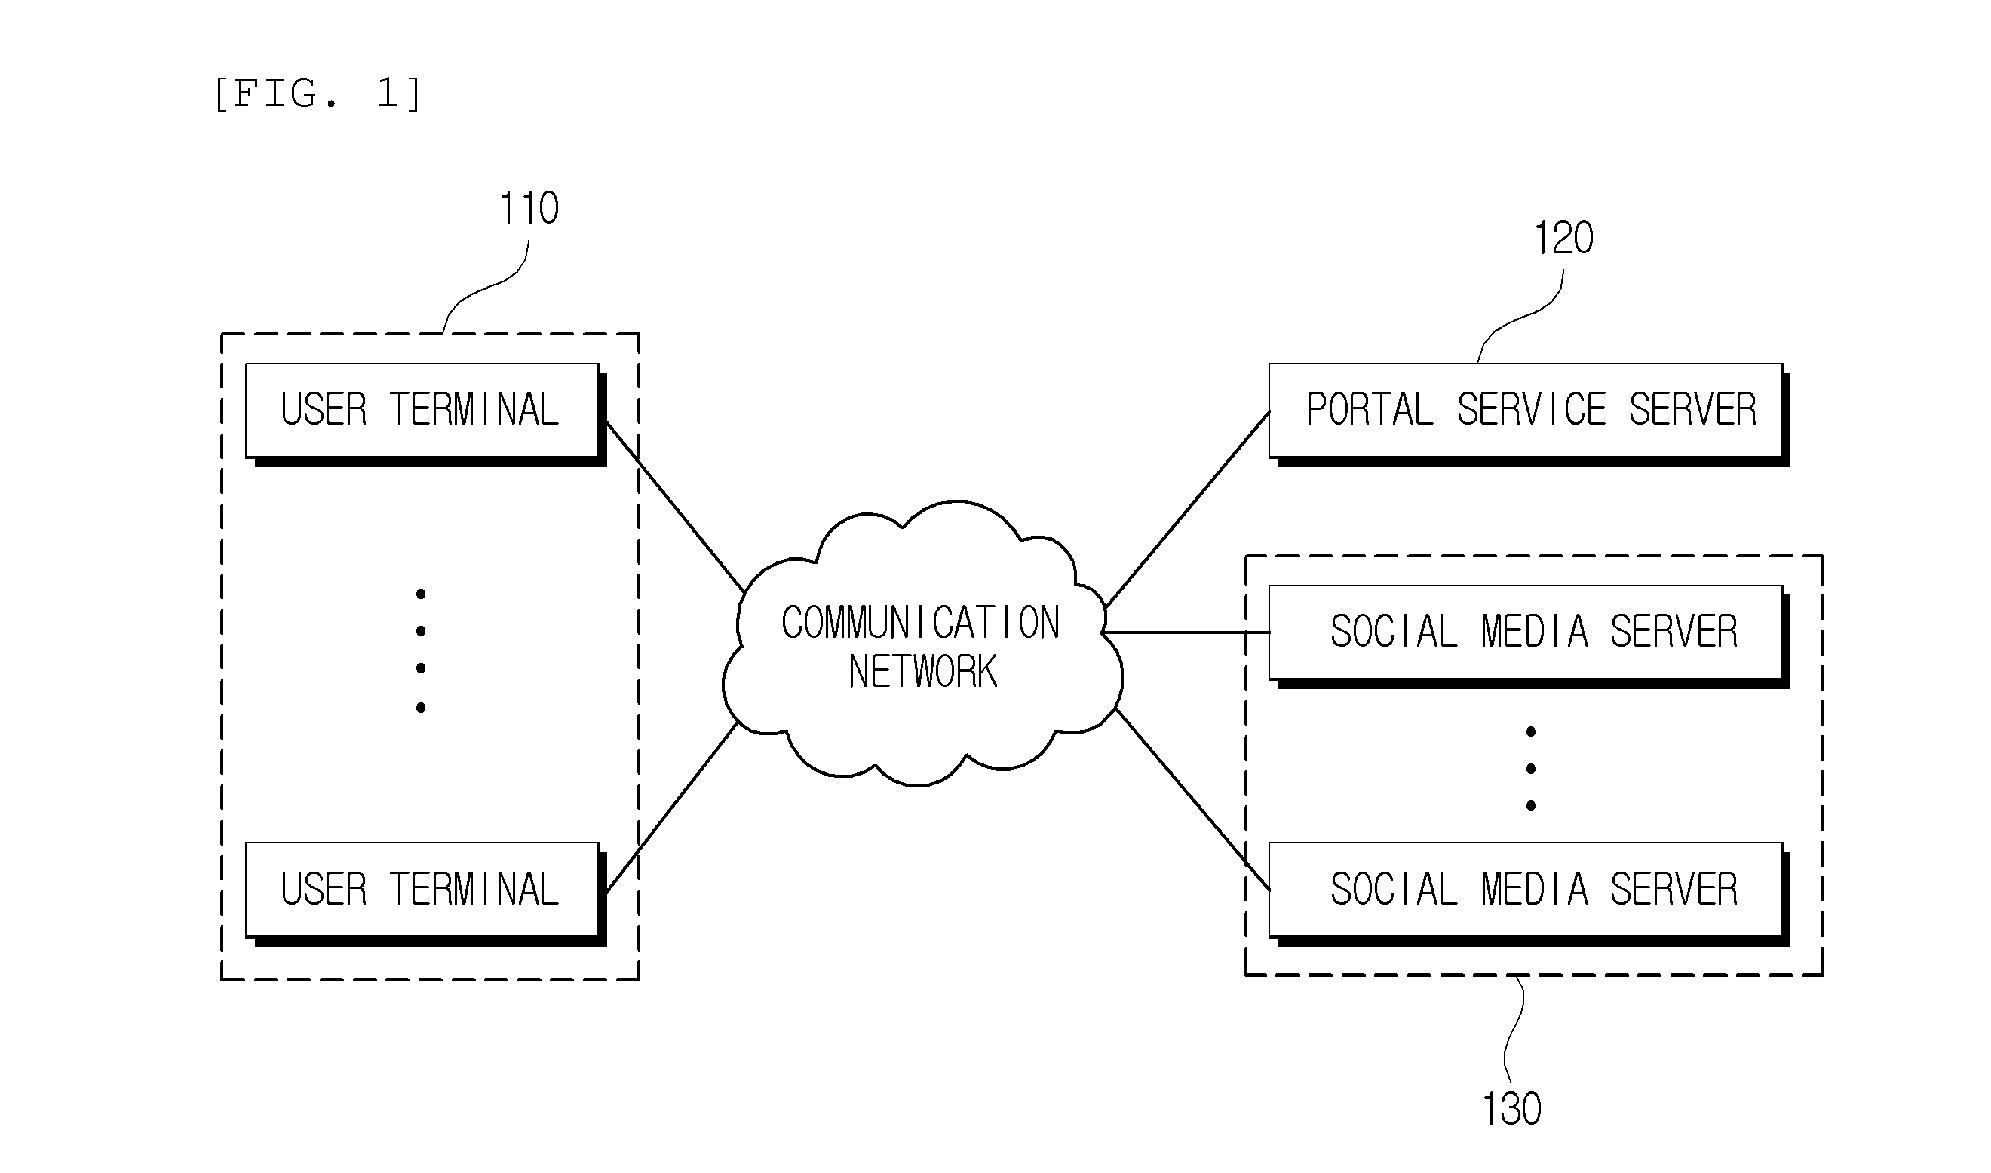 Apparatus, system, and method for detecting complex issues based on social media analysis